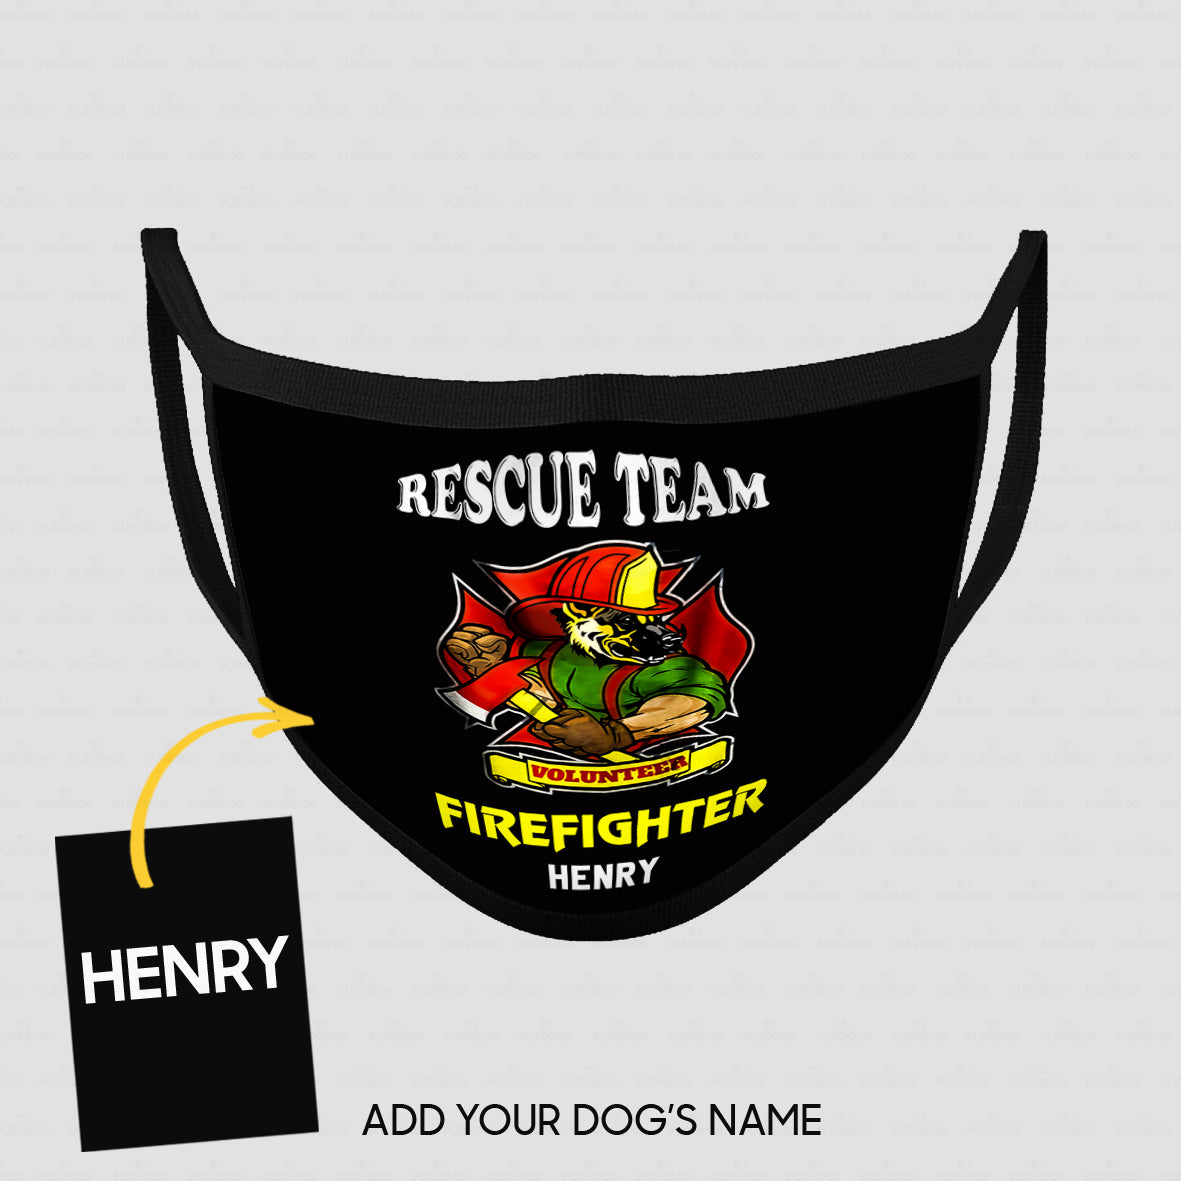 Personalized Dog Gift Idea - Rescue Firefighter Team Volunteer For Dog Lovers - Cloth Mask